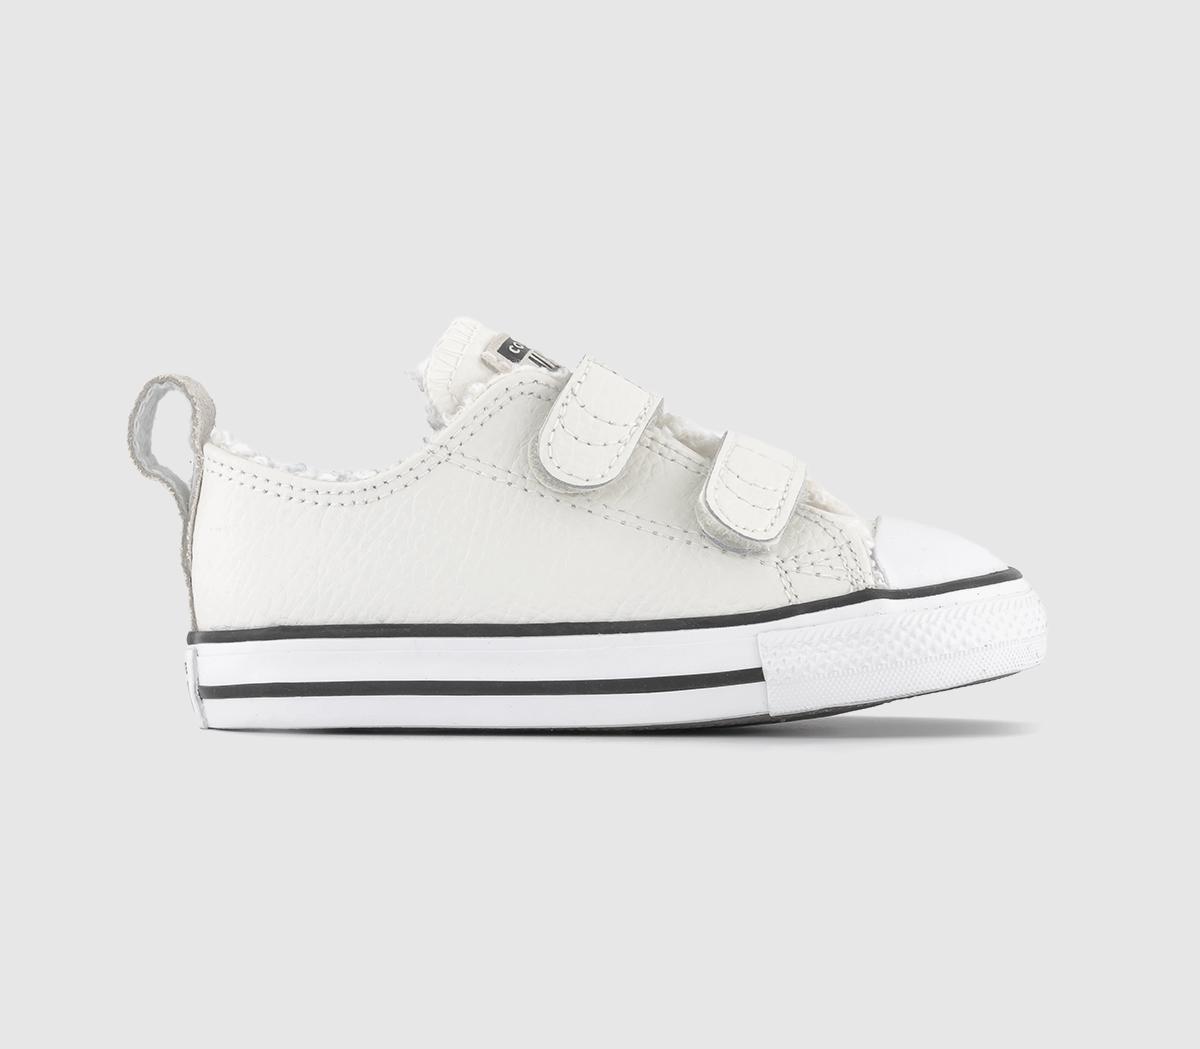 ConverseAll Star 2vlace Trainers Egret White Black